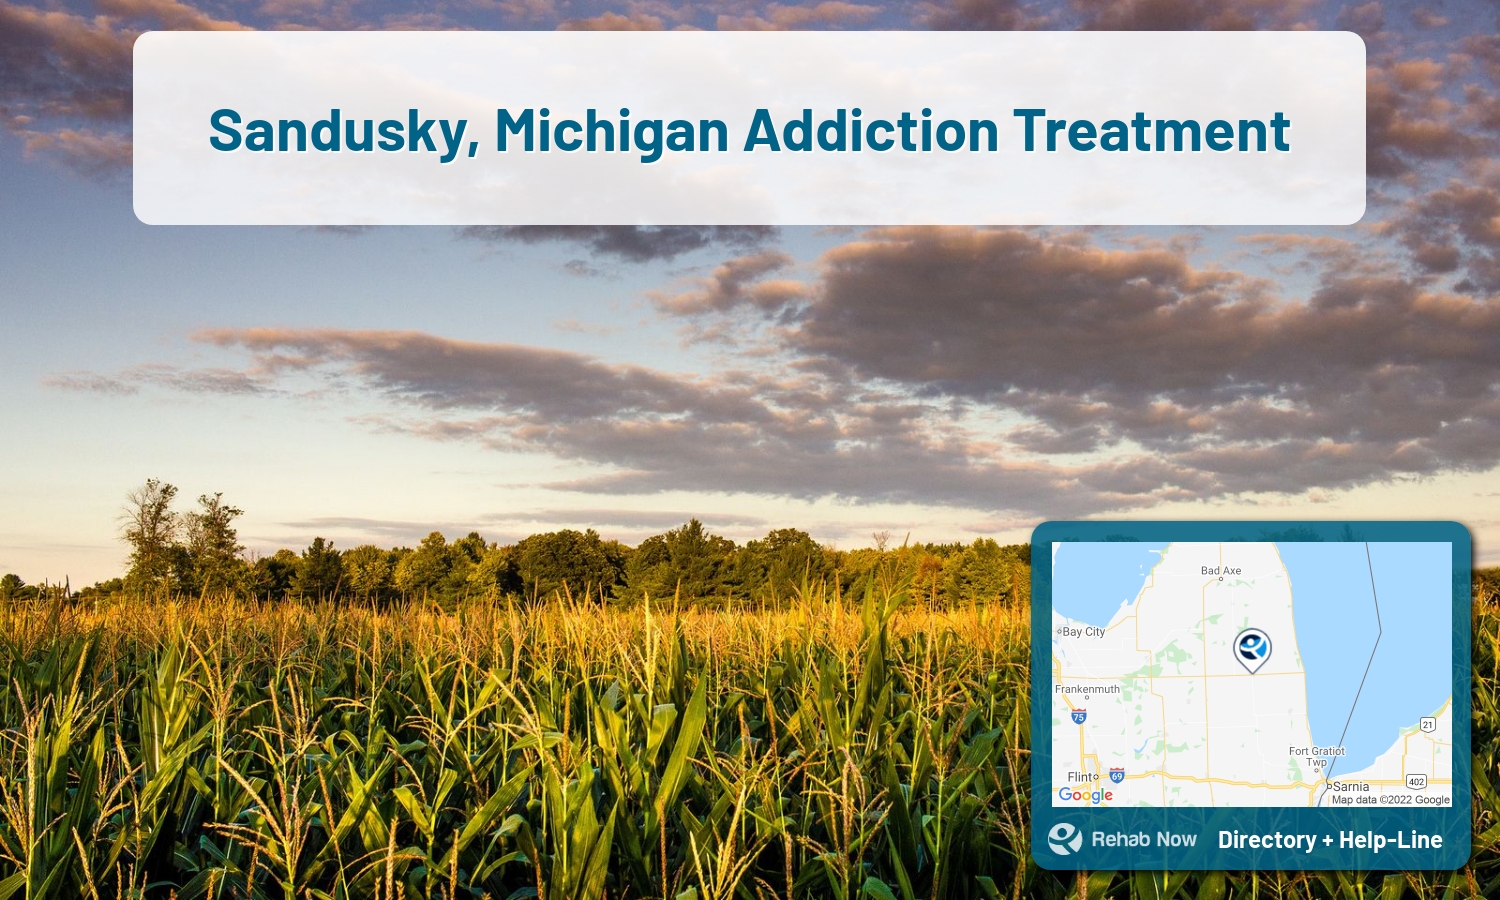 List of alcohol and drug treatment centers near you in Sandusky, Michigan. Research certifications, programs, methods, pricing, and more.